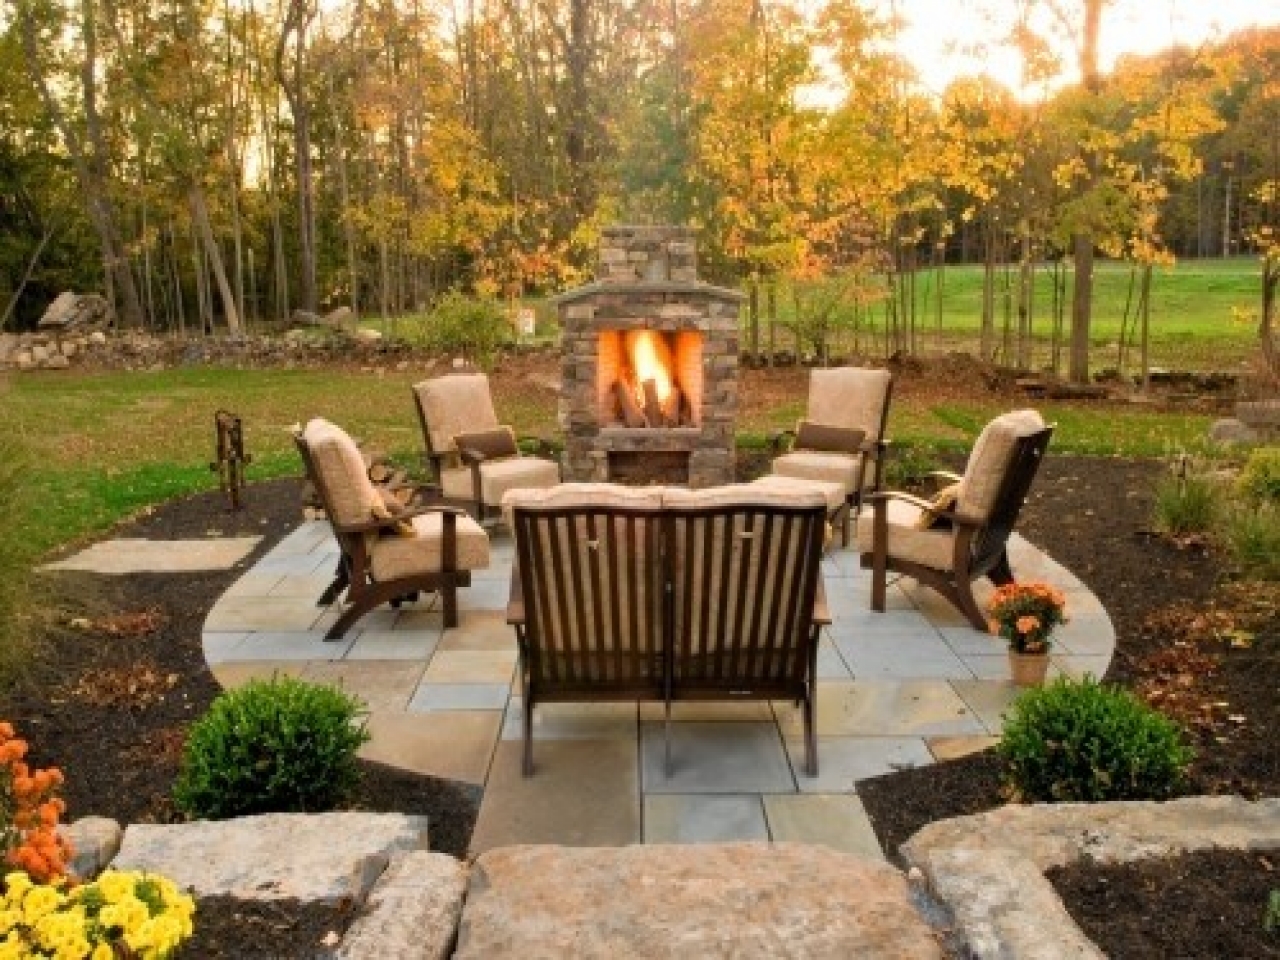 Ideas of ... Brilliant Outdoor Fireplace Patio For Your Small Home Interior Ideas  with outdoor fireplace patio